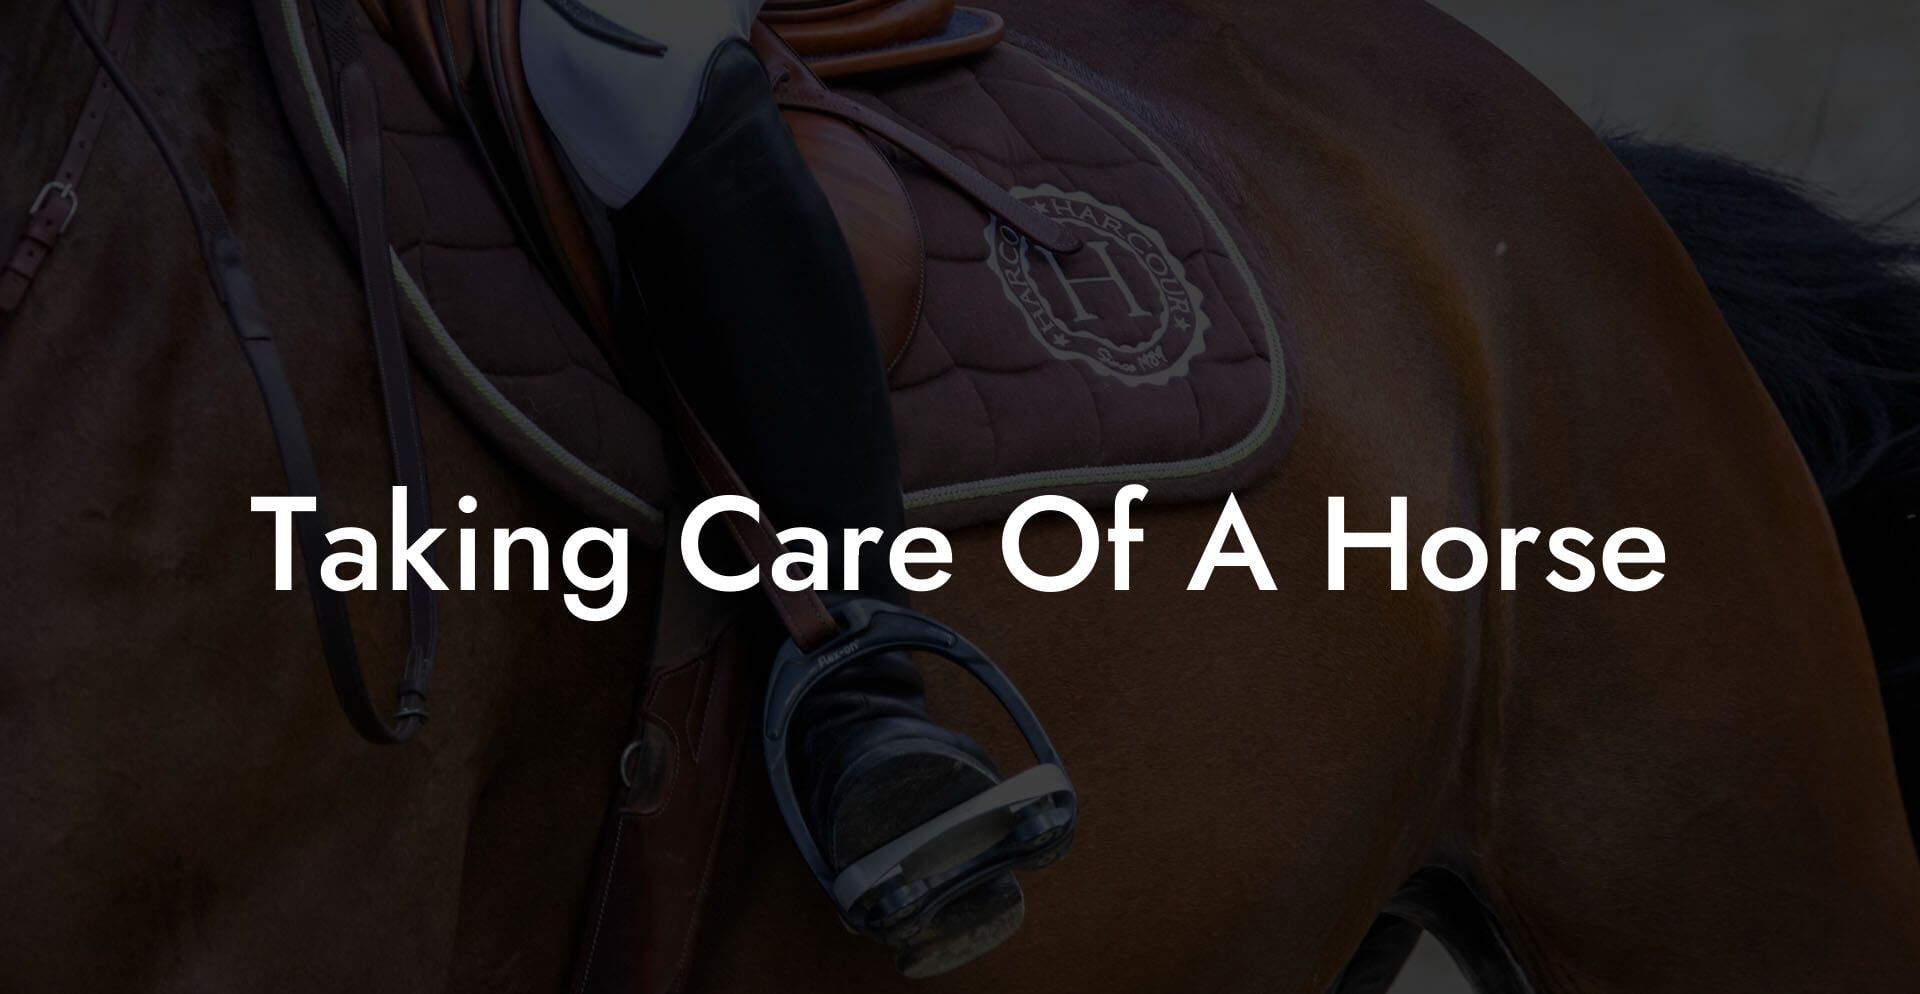 Taking Care Of A Horse